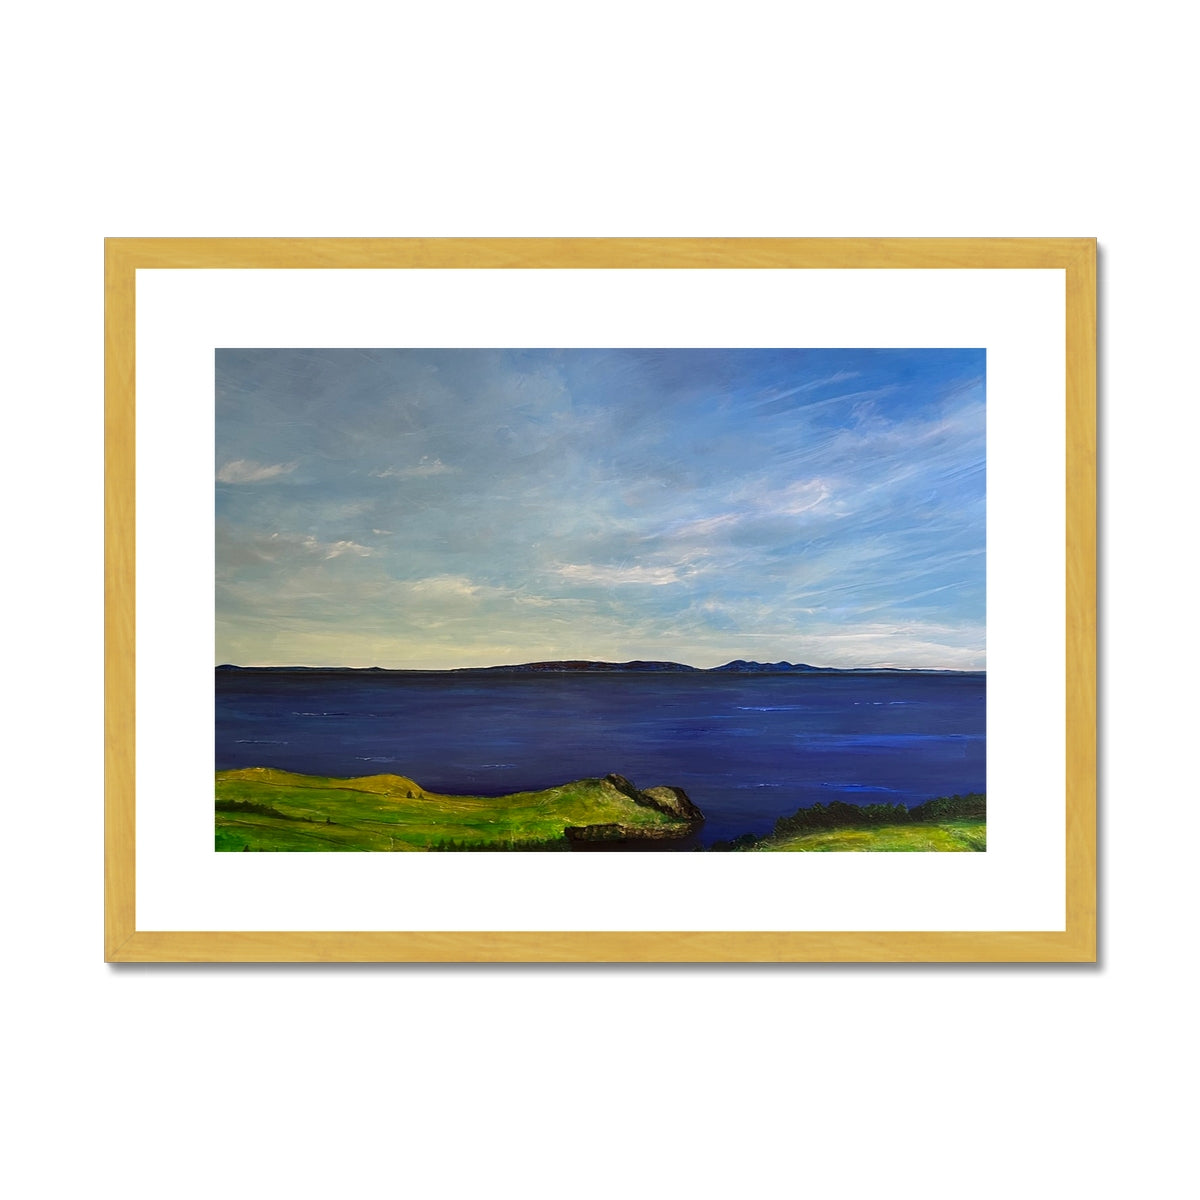 From Ireland To Scotland Painting | Antique Framed & Mounted Prints From Scotland-Antique Framed & Mounted Prints-World Art Gallery-A2 Landscape-Gold Frame-Paintings, Prints, Homeware, Art Gifts From Scotland By Scottish Artist Kevin Hunter